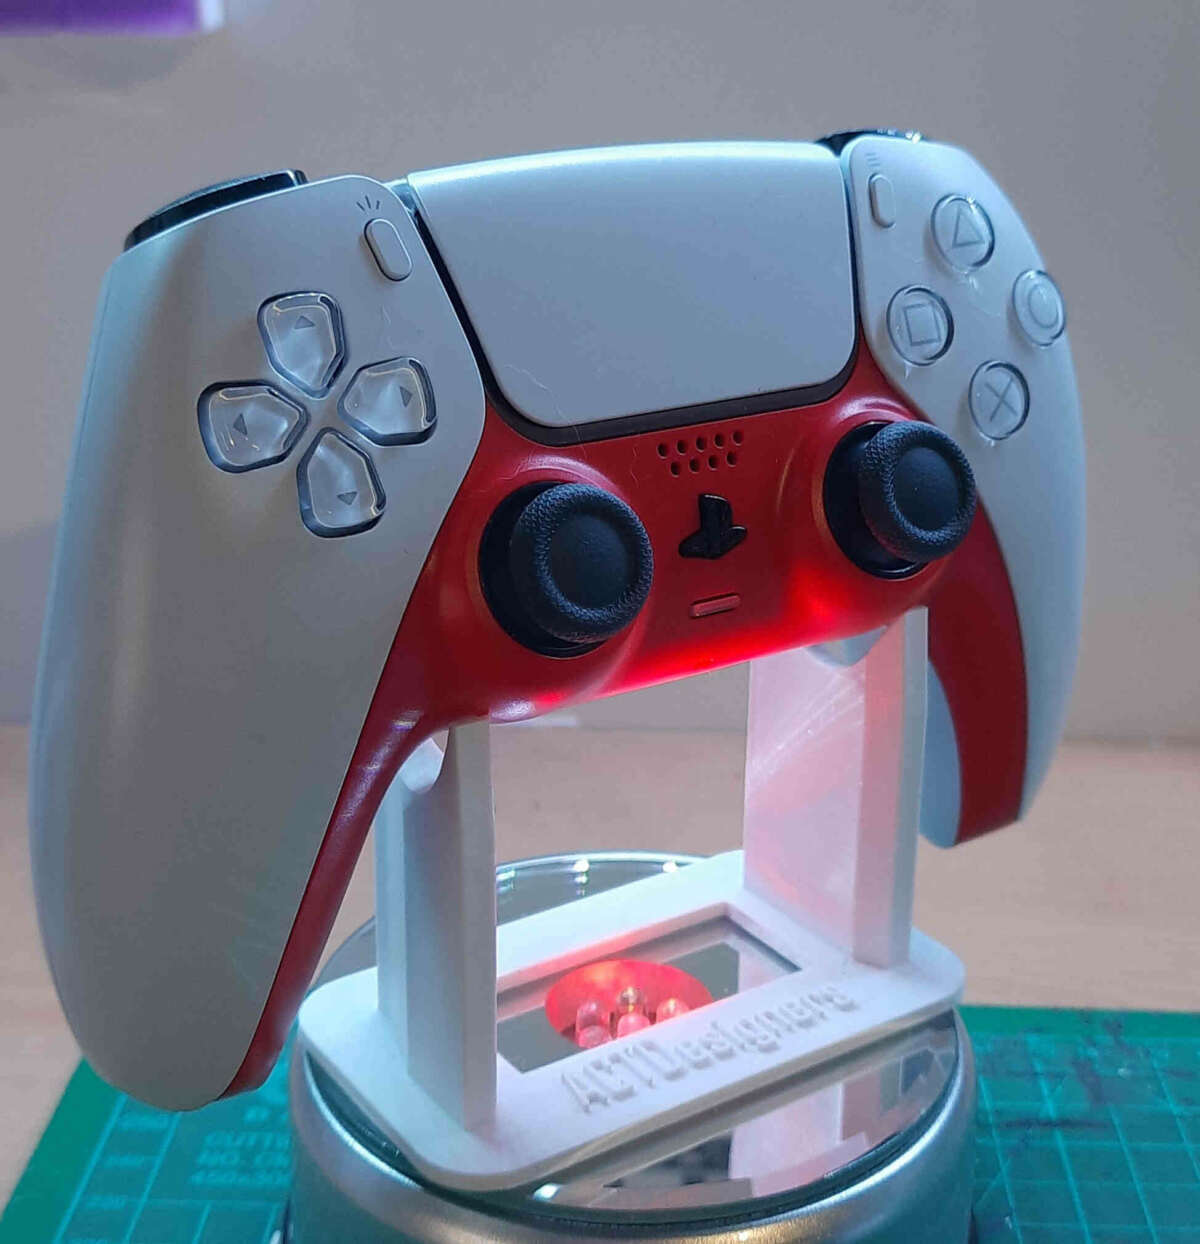 A Universal controller stand capable of holding and displaying xbox, playstation and nintendo controllers.